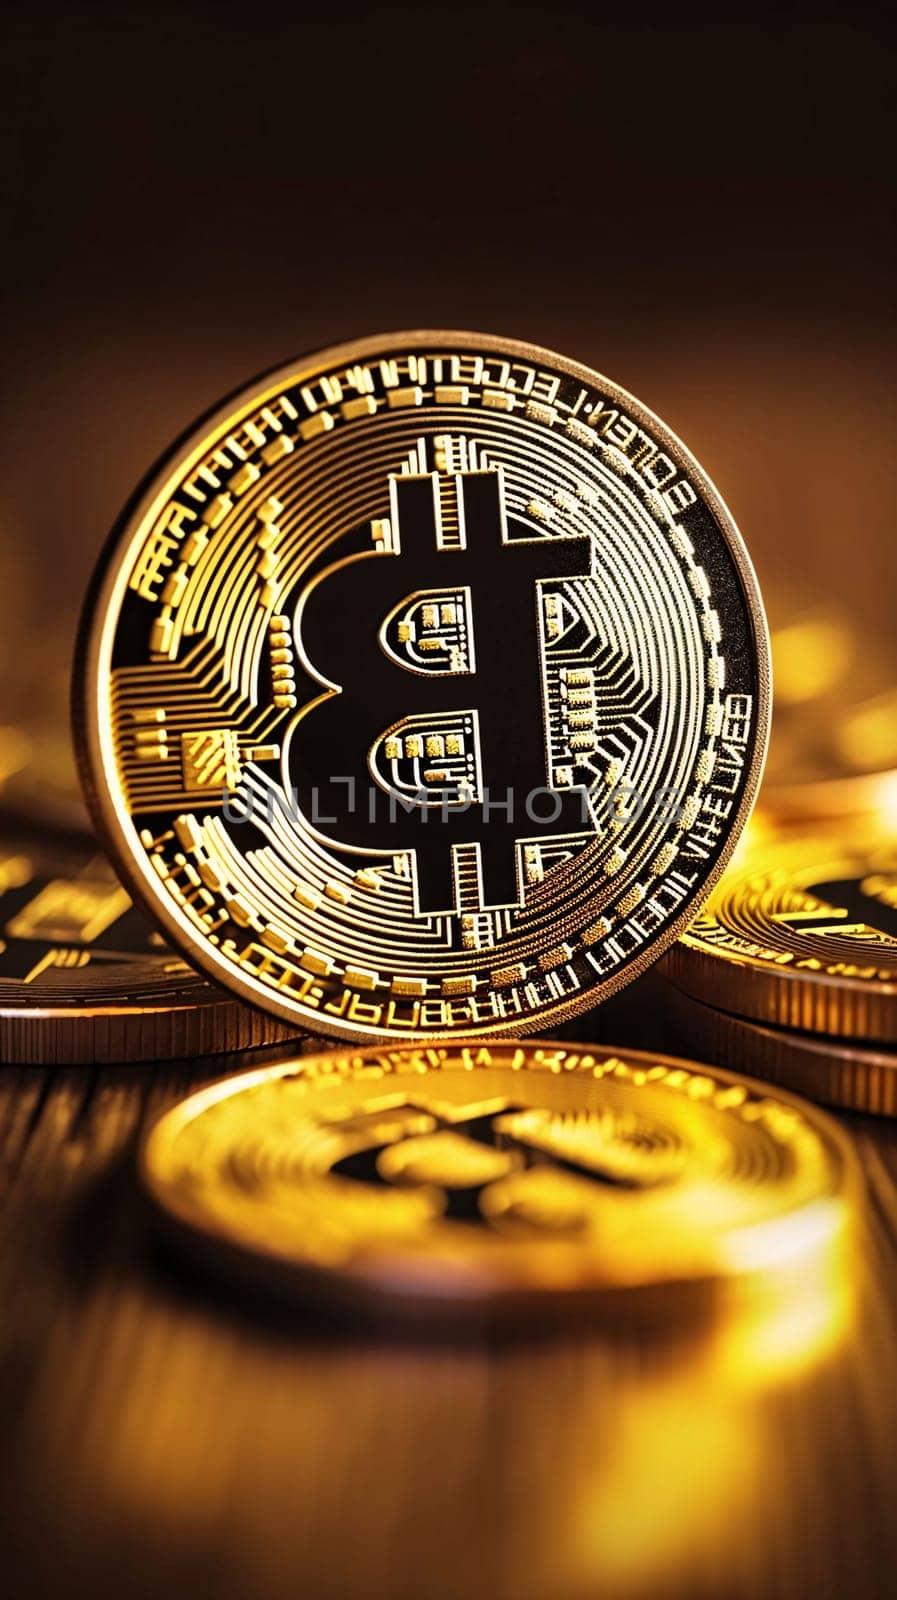 Stock Market: Bitcoin. Cryptocurrency. Golden coins with bitcoin symbol on dark background.